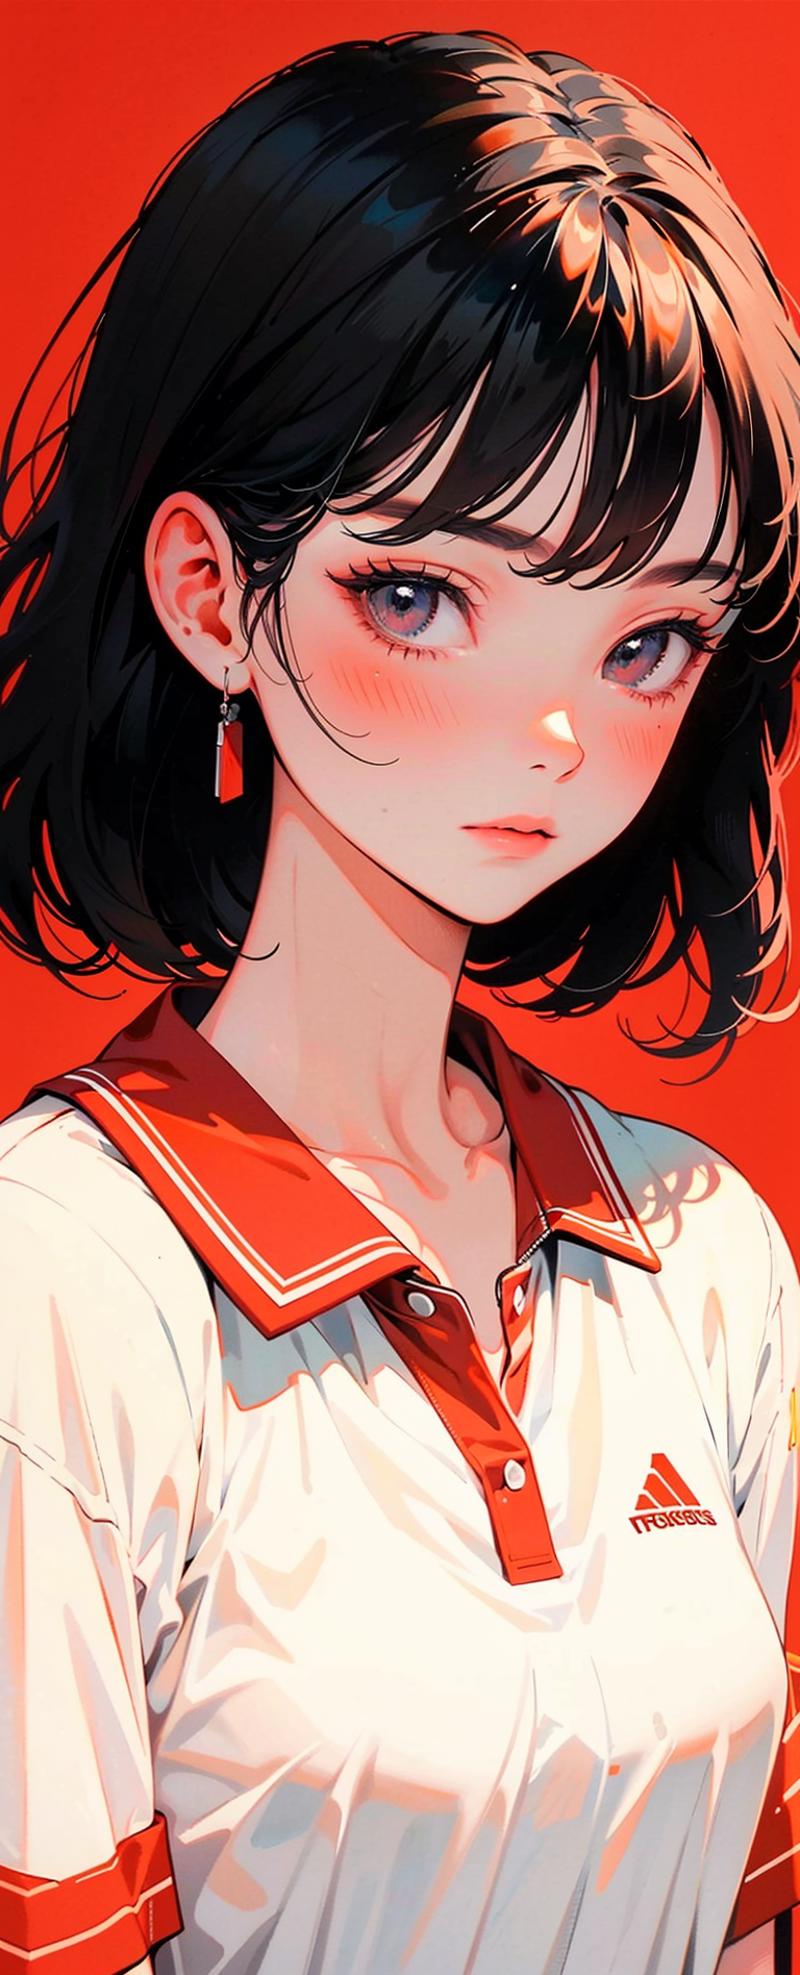 Anime-style drawing of a girl with a red shirt and white collar, wearing earrings.